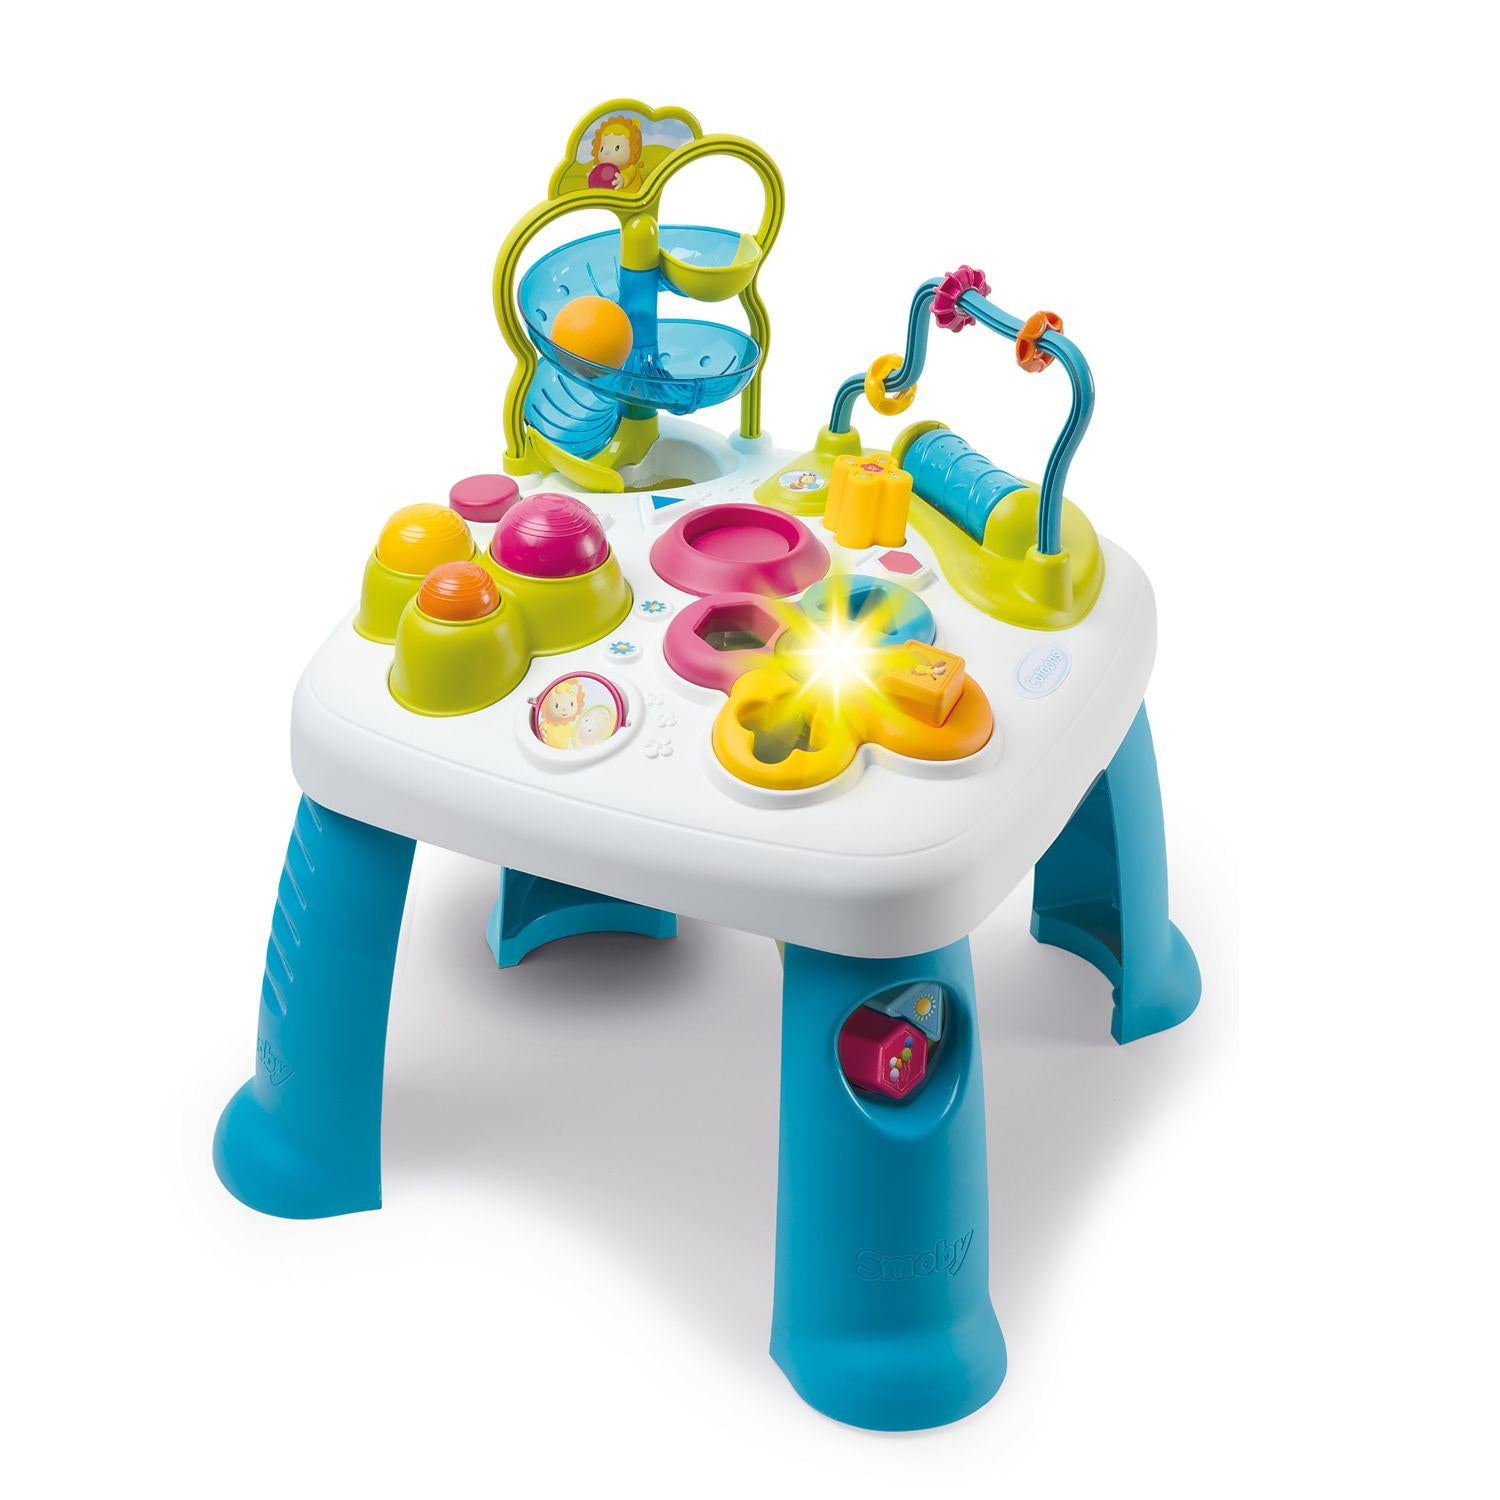 Smoby Toys Cotoons Activity Table Sorter Toy - Walmart.com